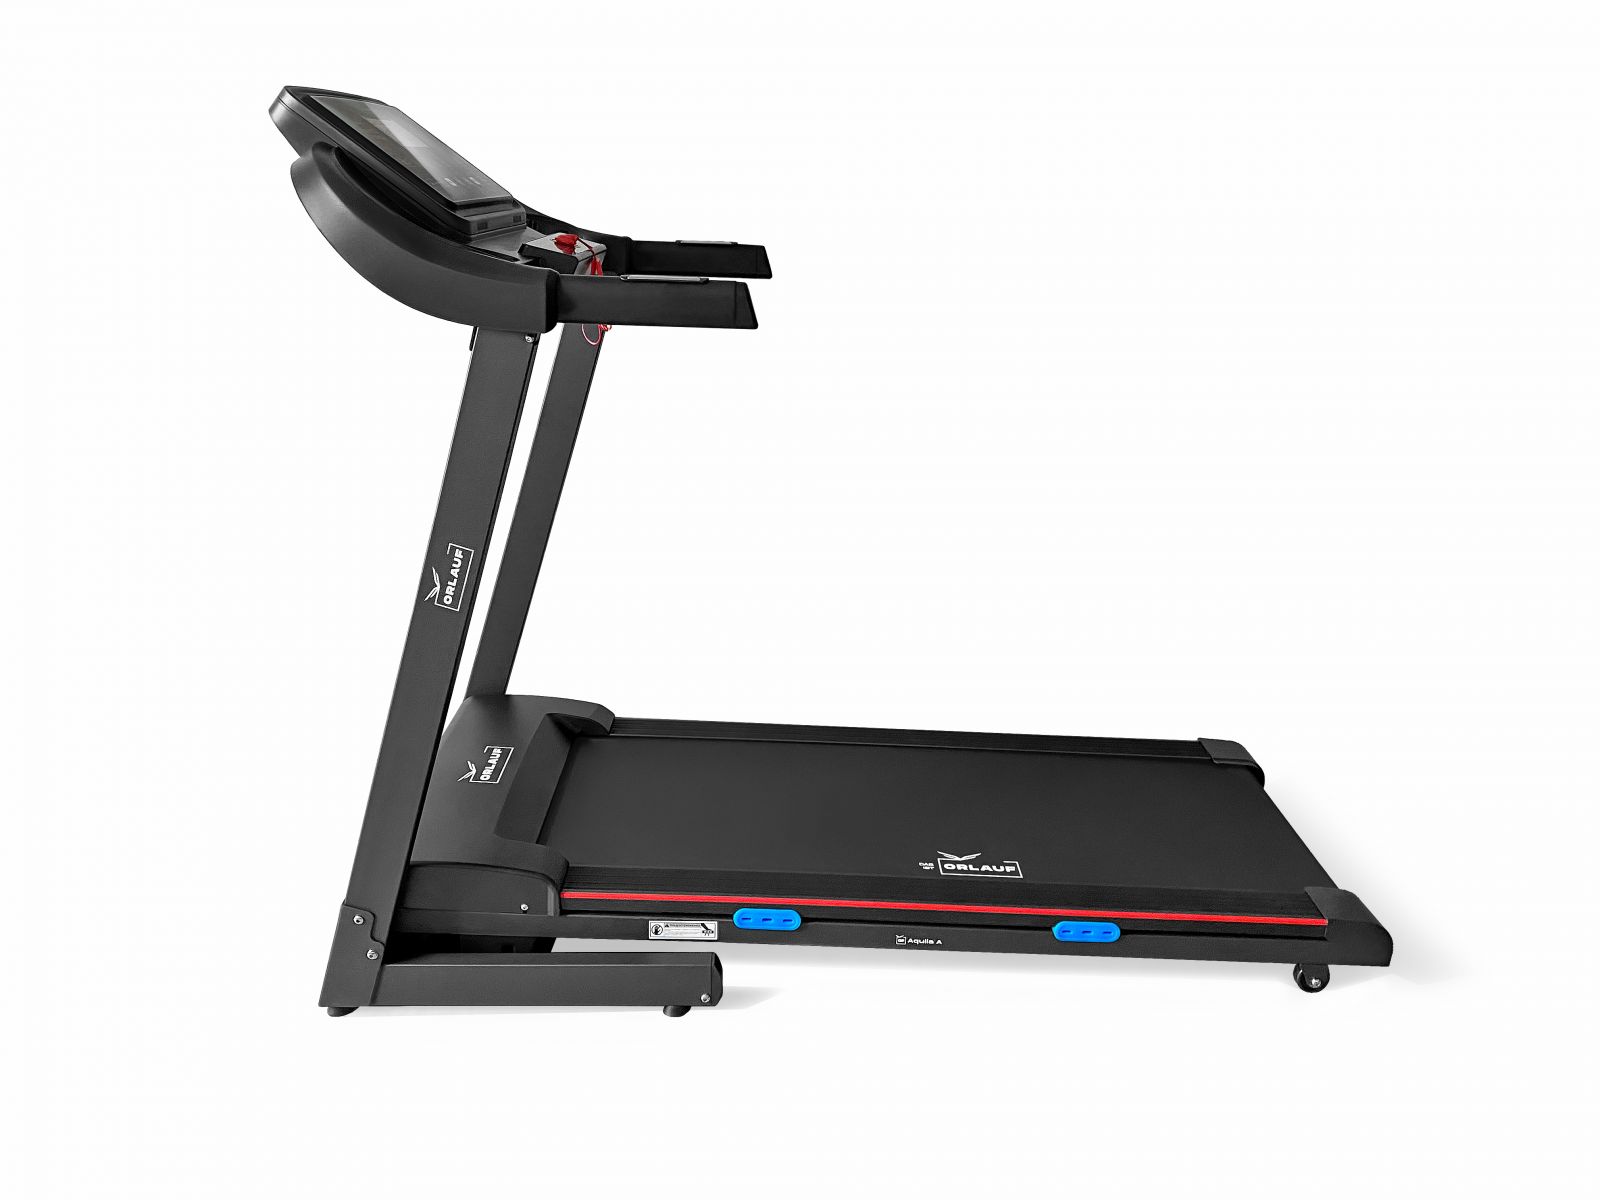 Photo of the Orlauf Fitness Aquila A treadmill - for mobile device users